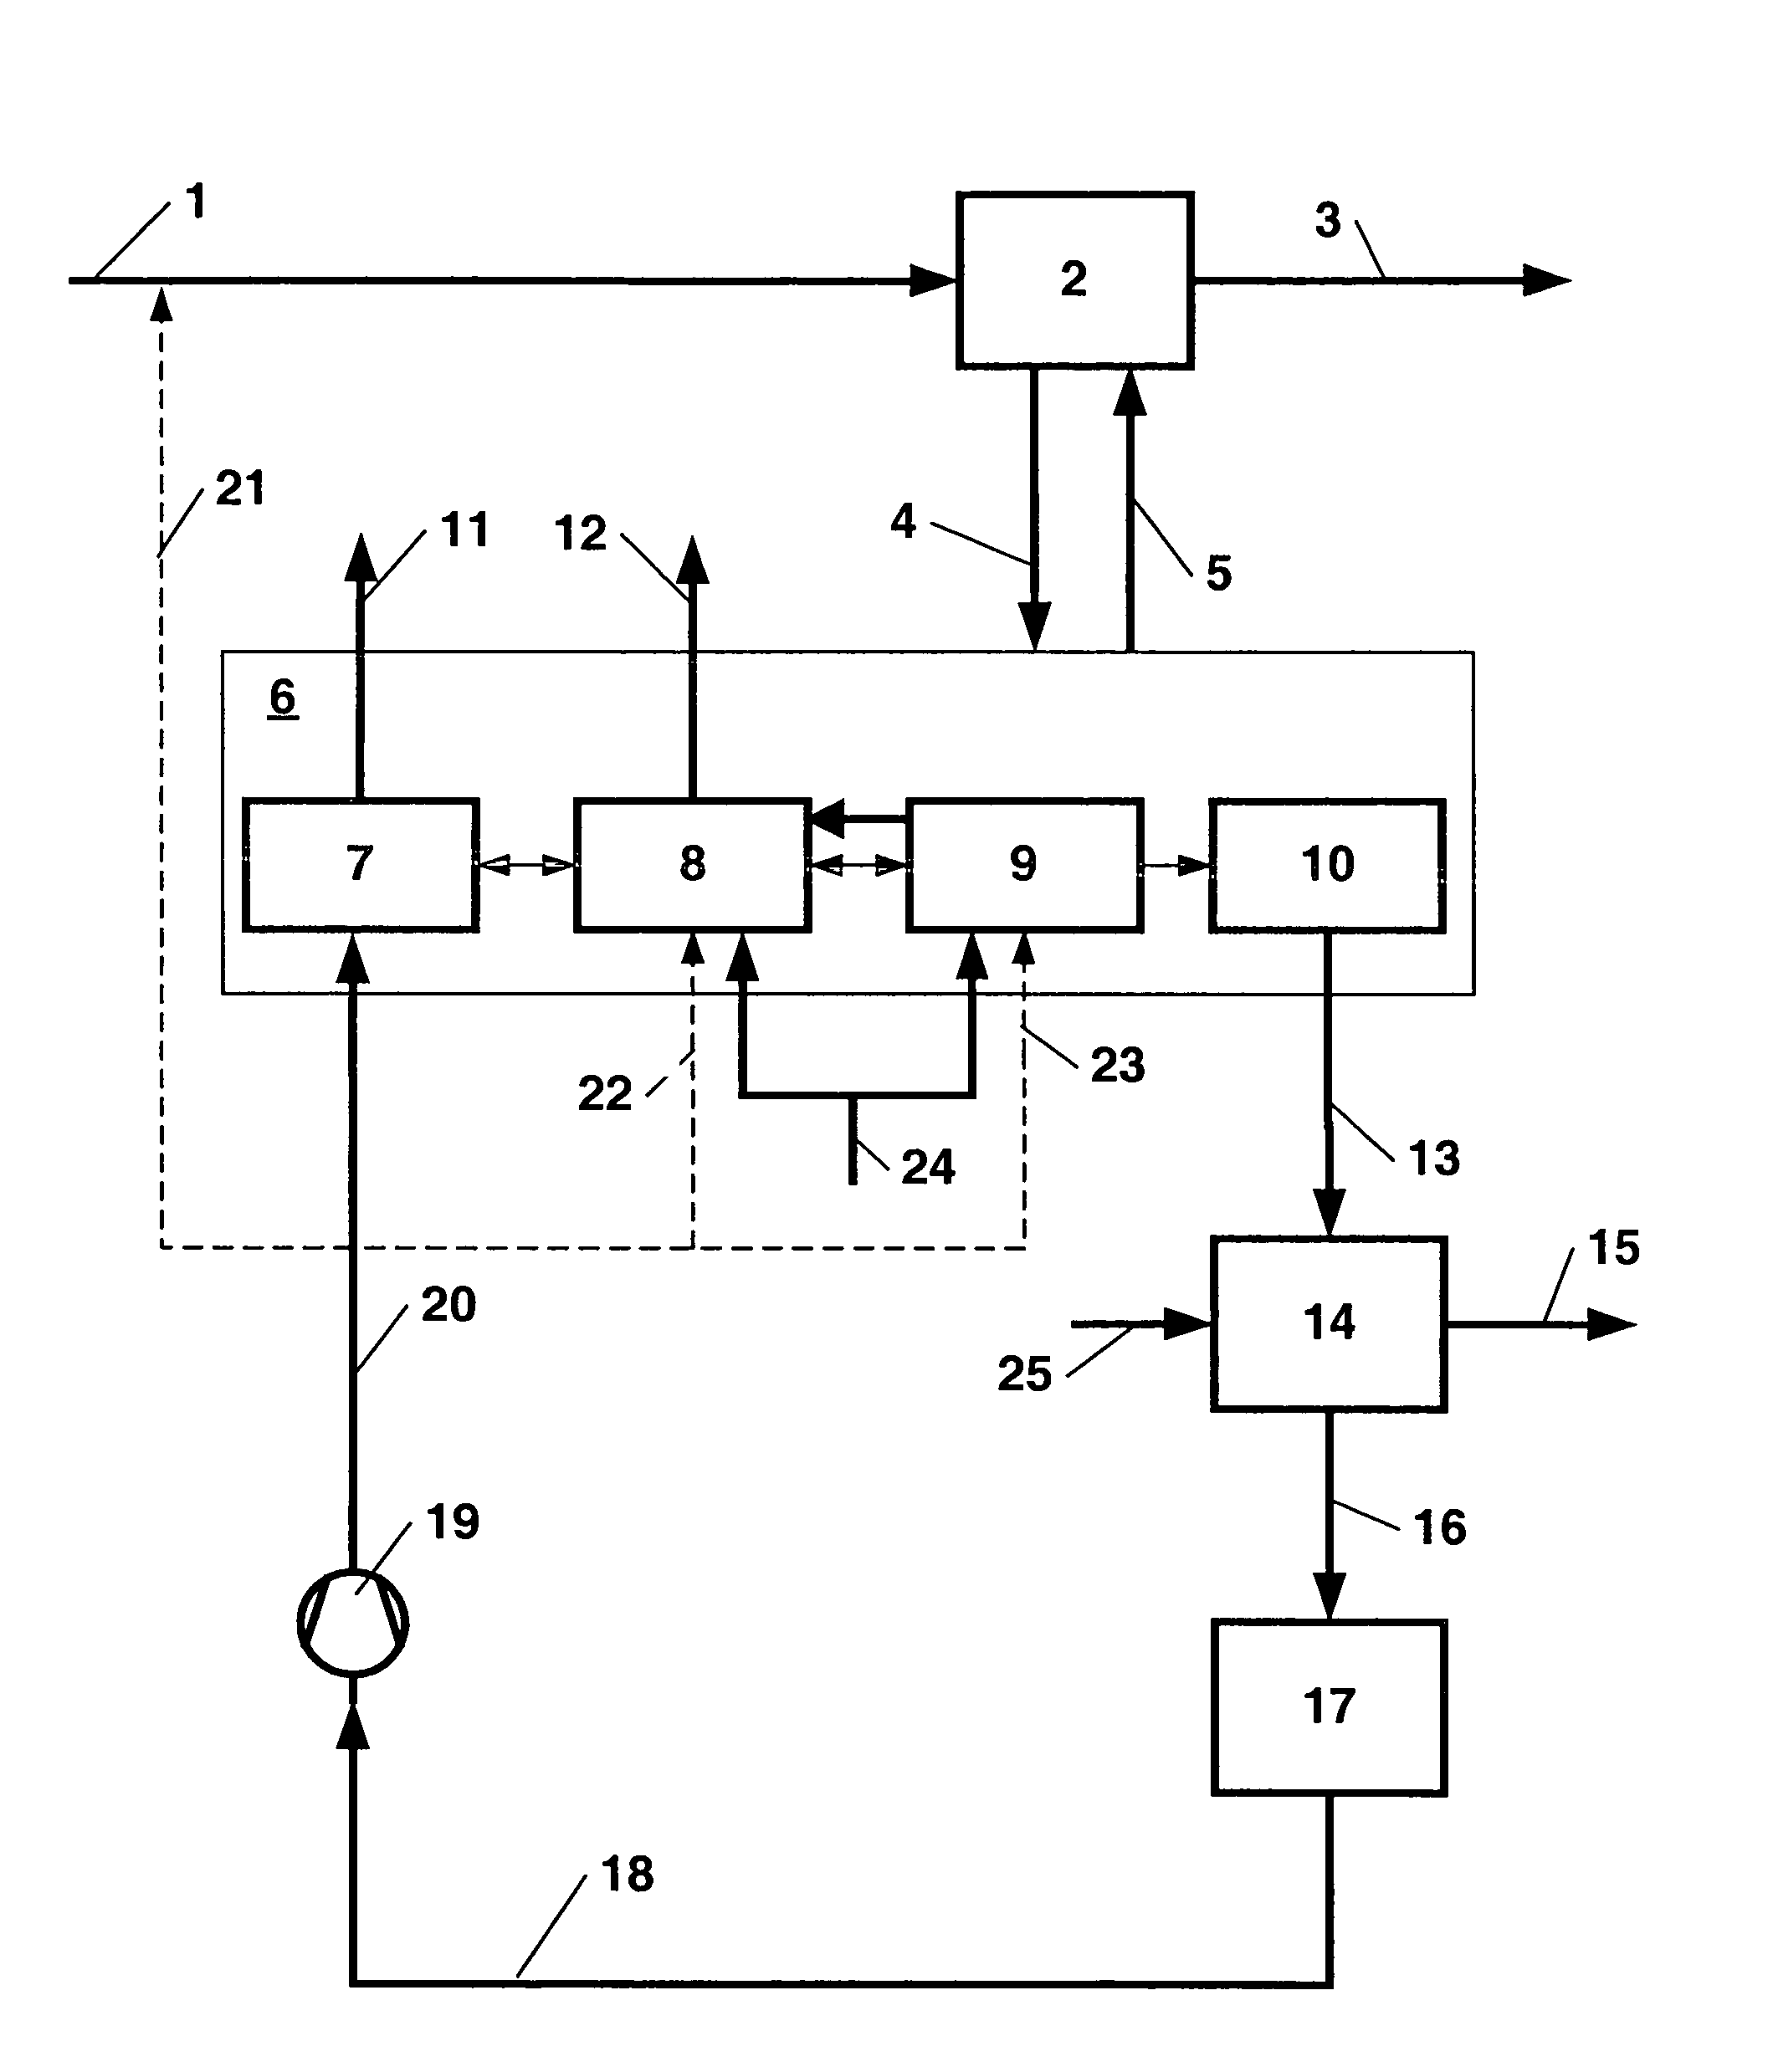 Method for removing hydrogen sulphide and other acidic gas components from pressurized technical gases